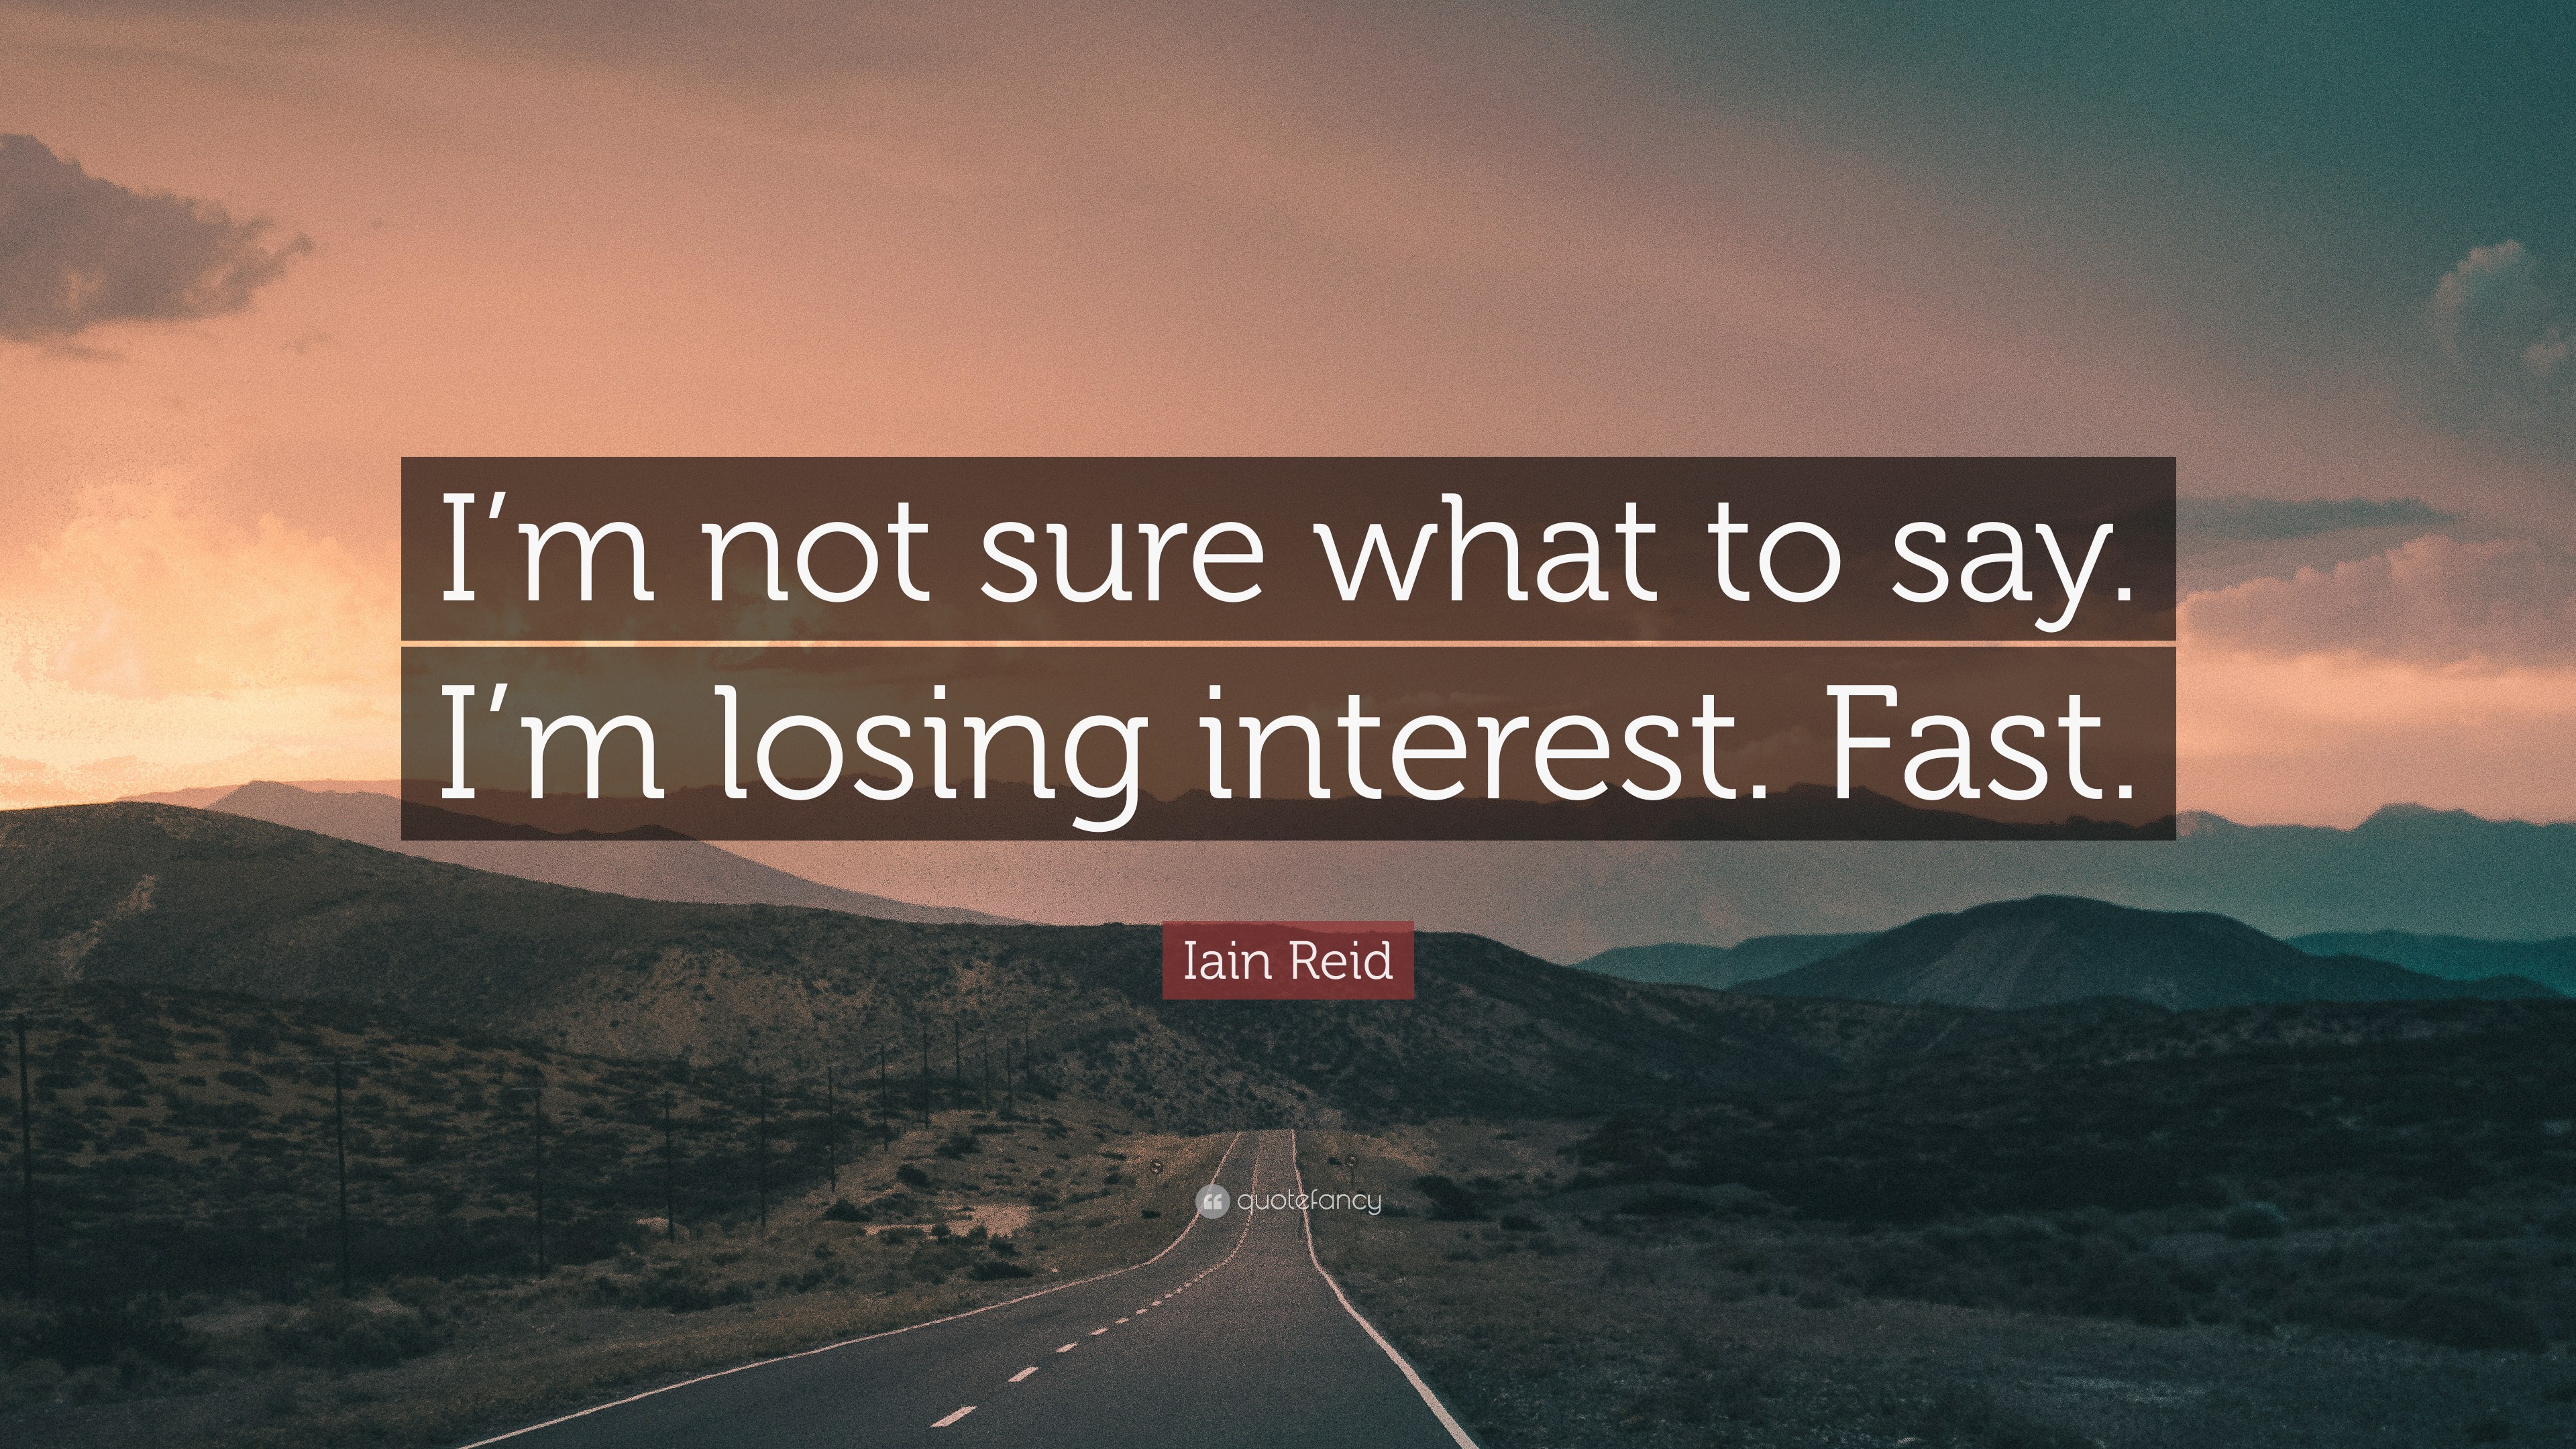 Iain Reid Quote: “I'm not sure what to say. I'm losing interest